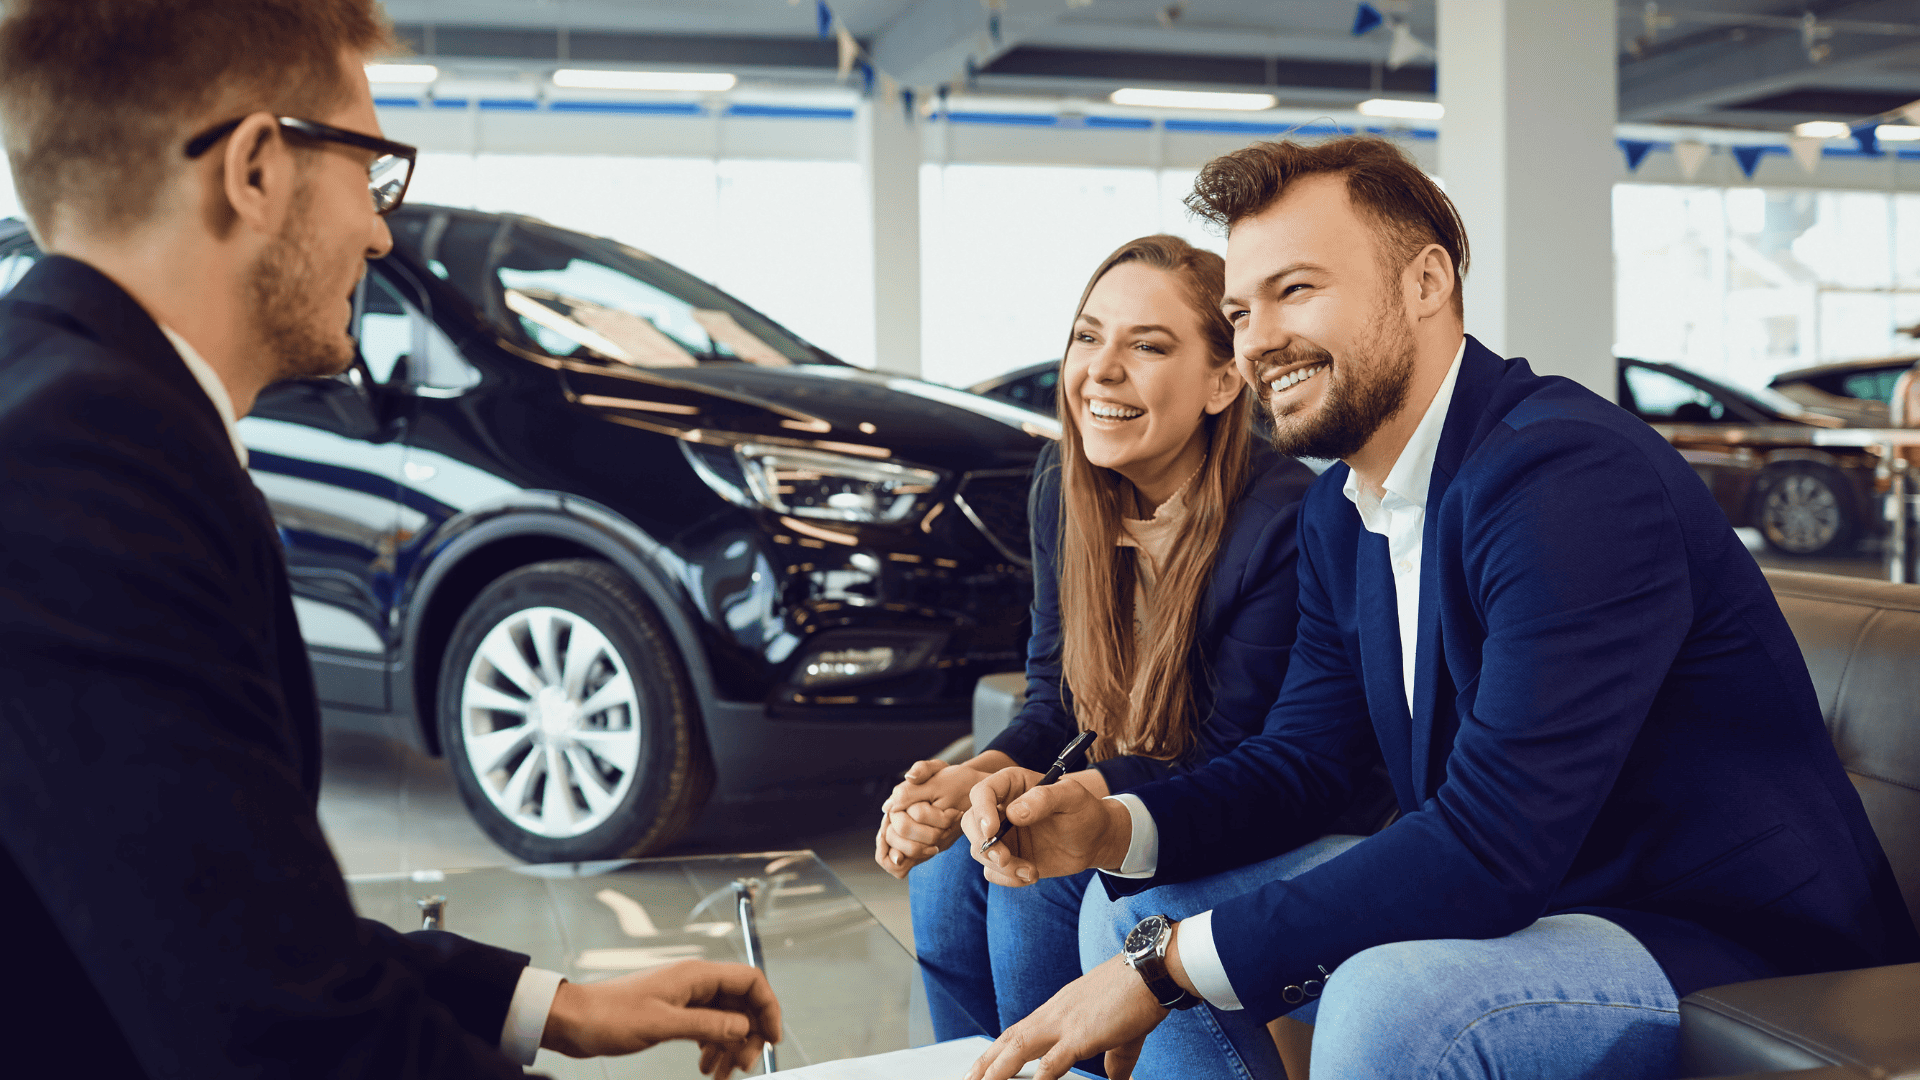 Car dealership marketing tips that help you make the sale